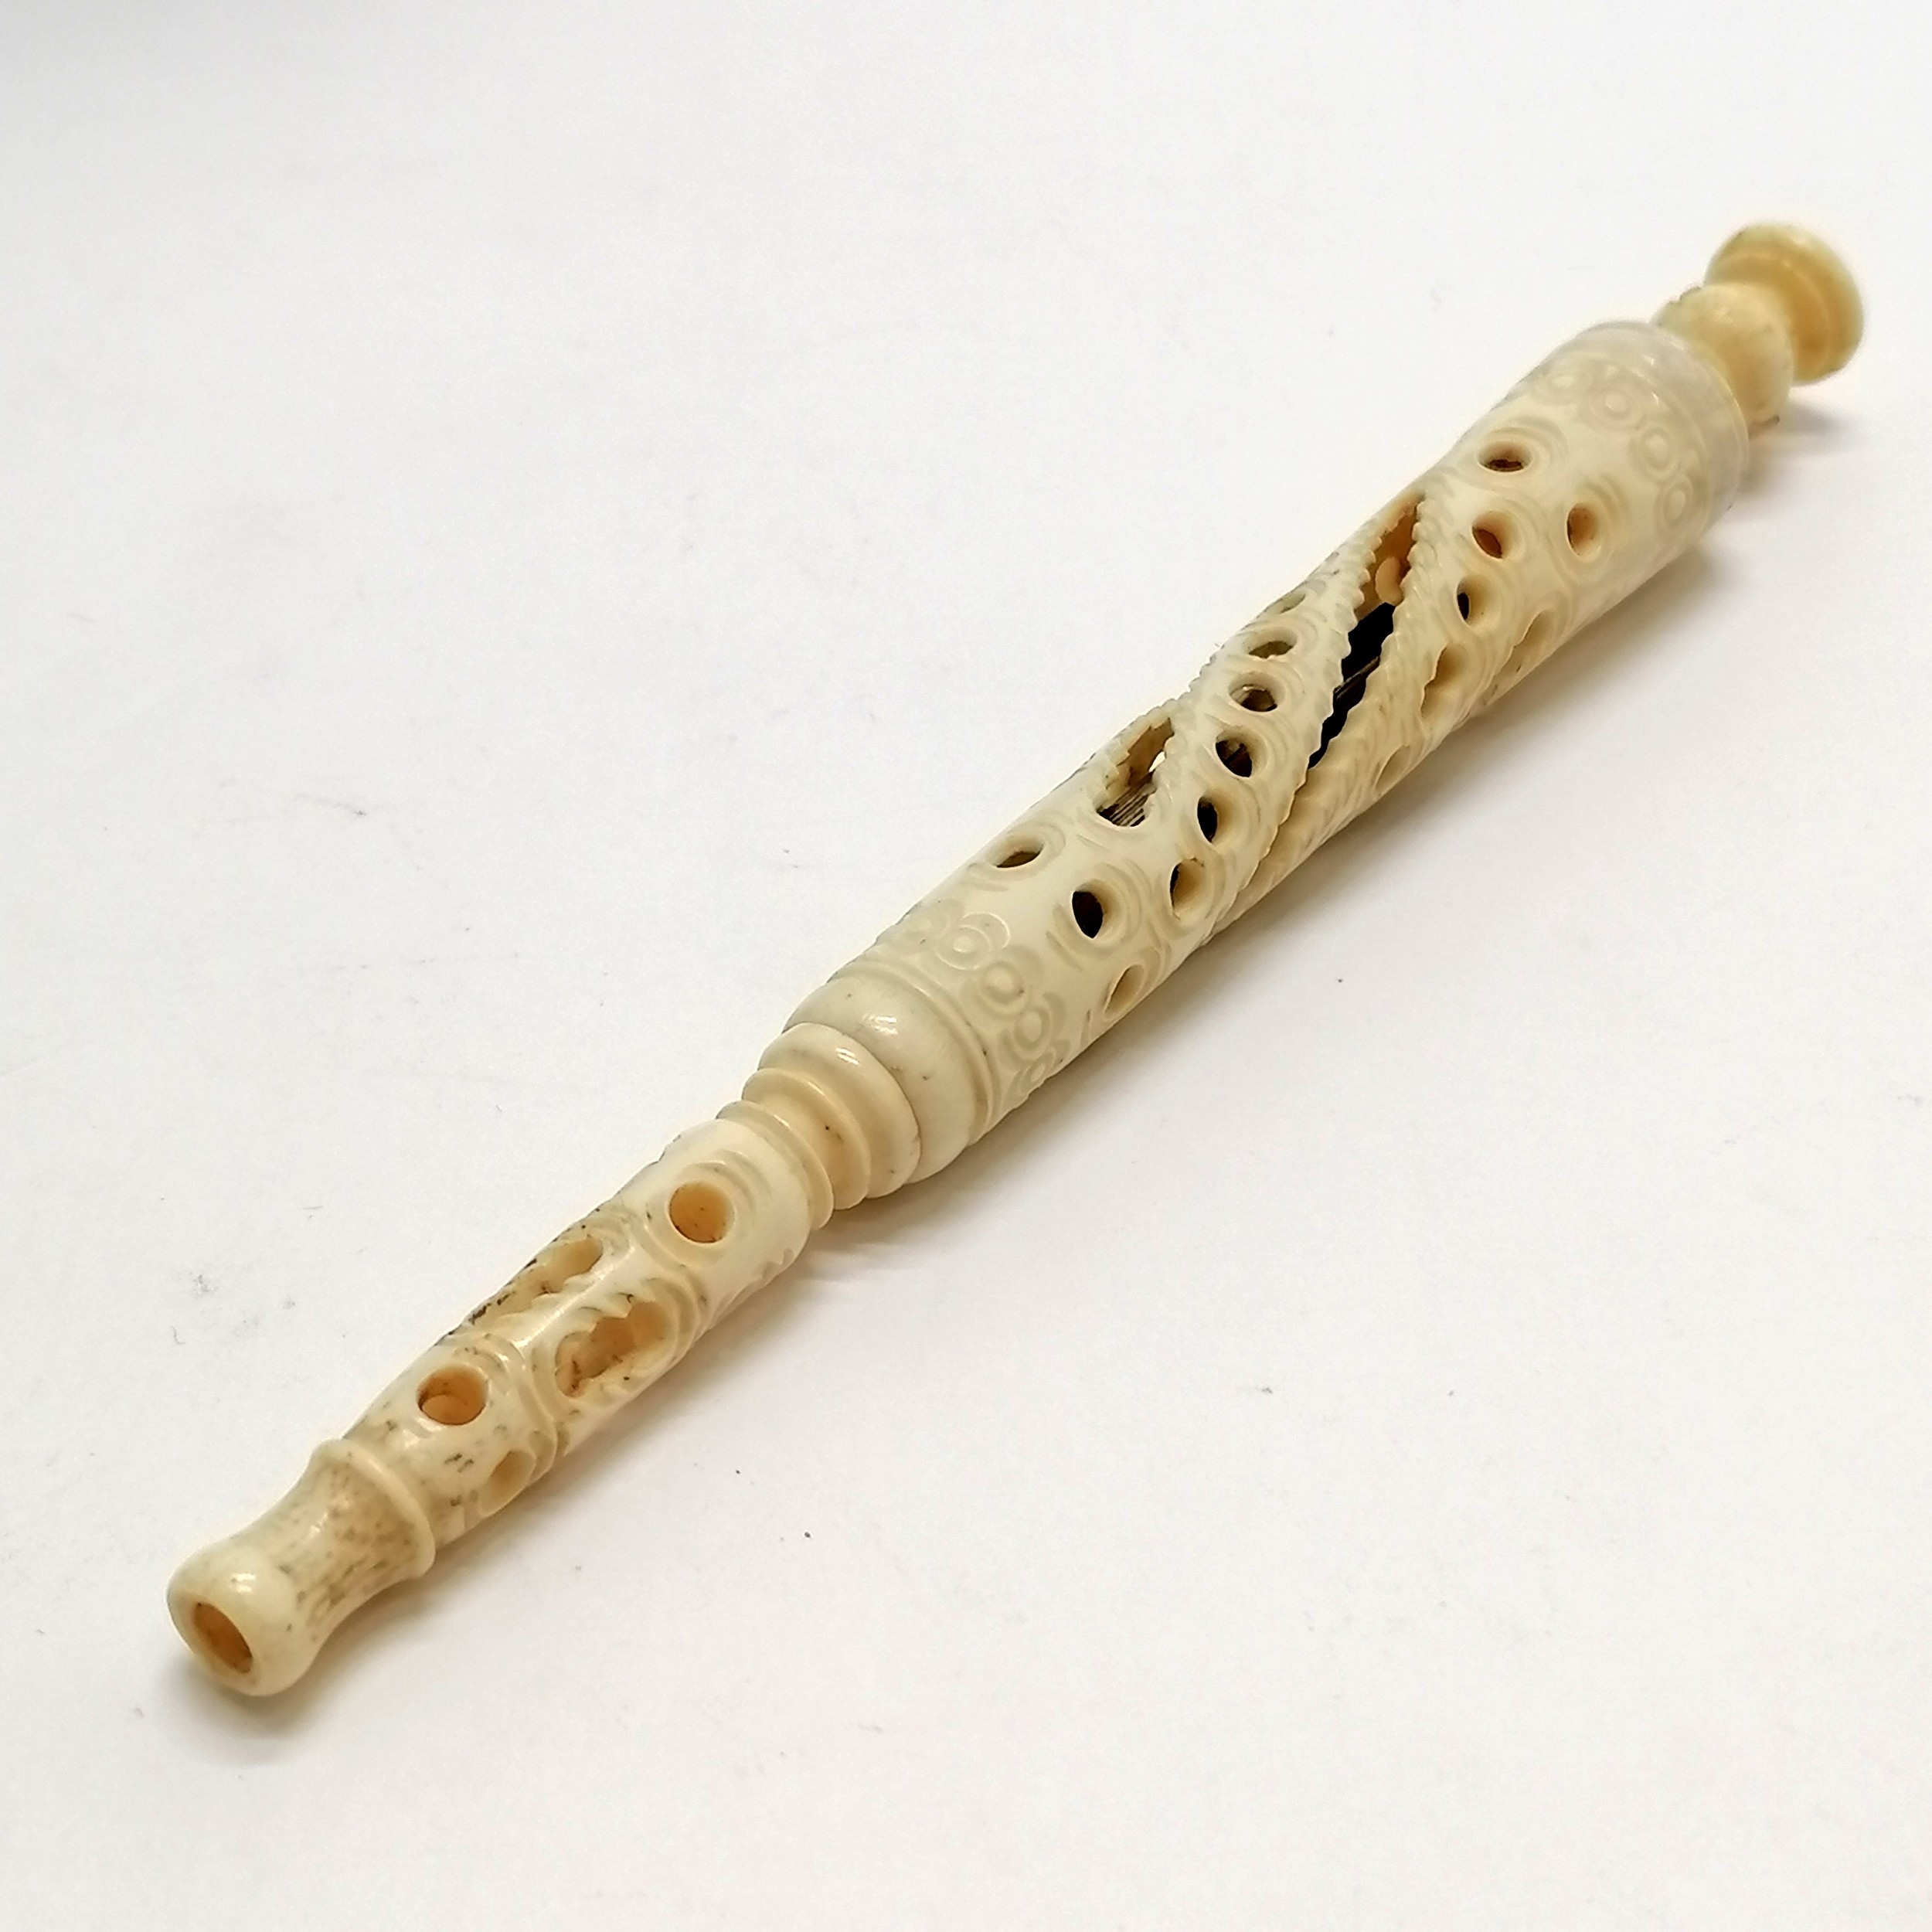 Antique carved bone dip pen with stanhope of West Pier, Brighton and has seal end - 13.5cm (closed) - Image 3 of 4